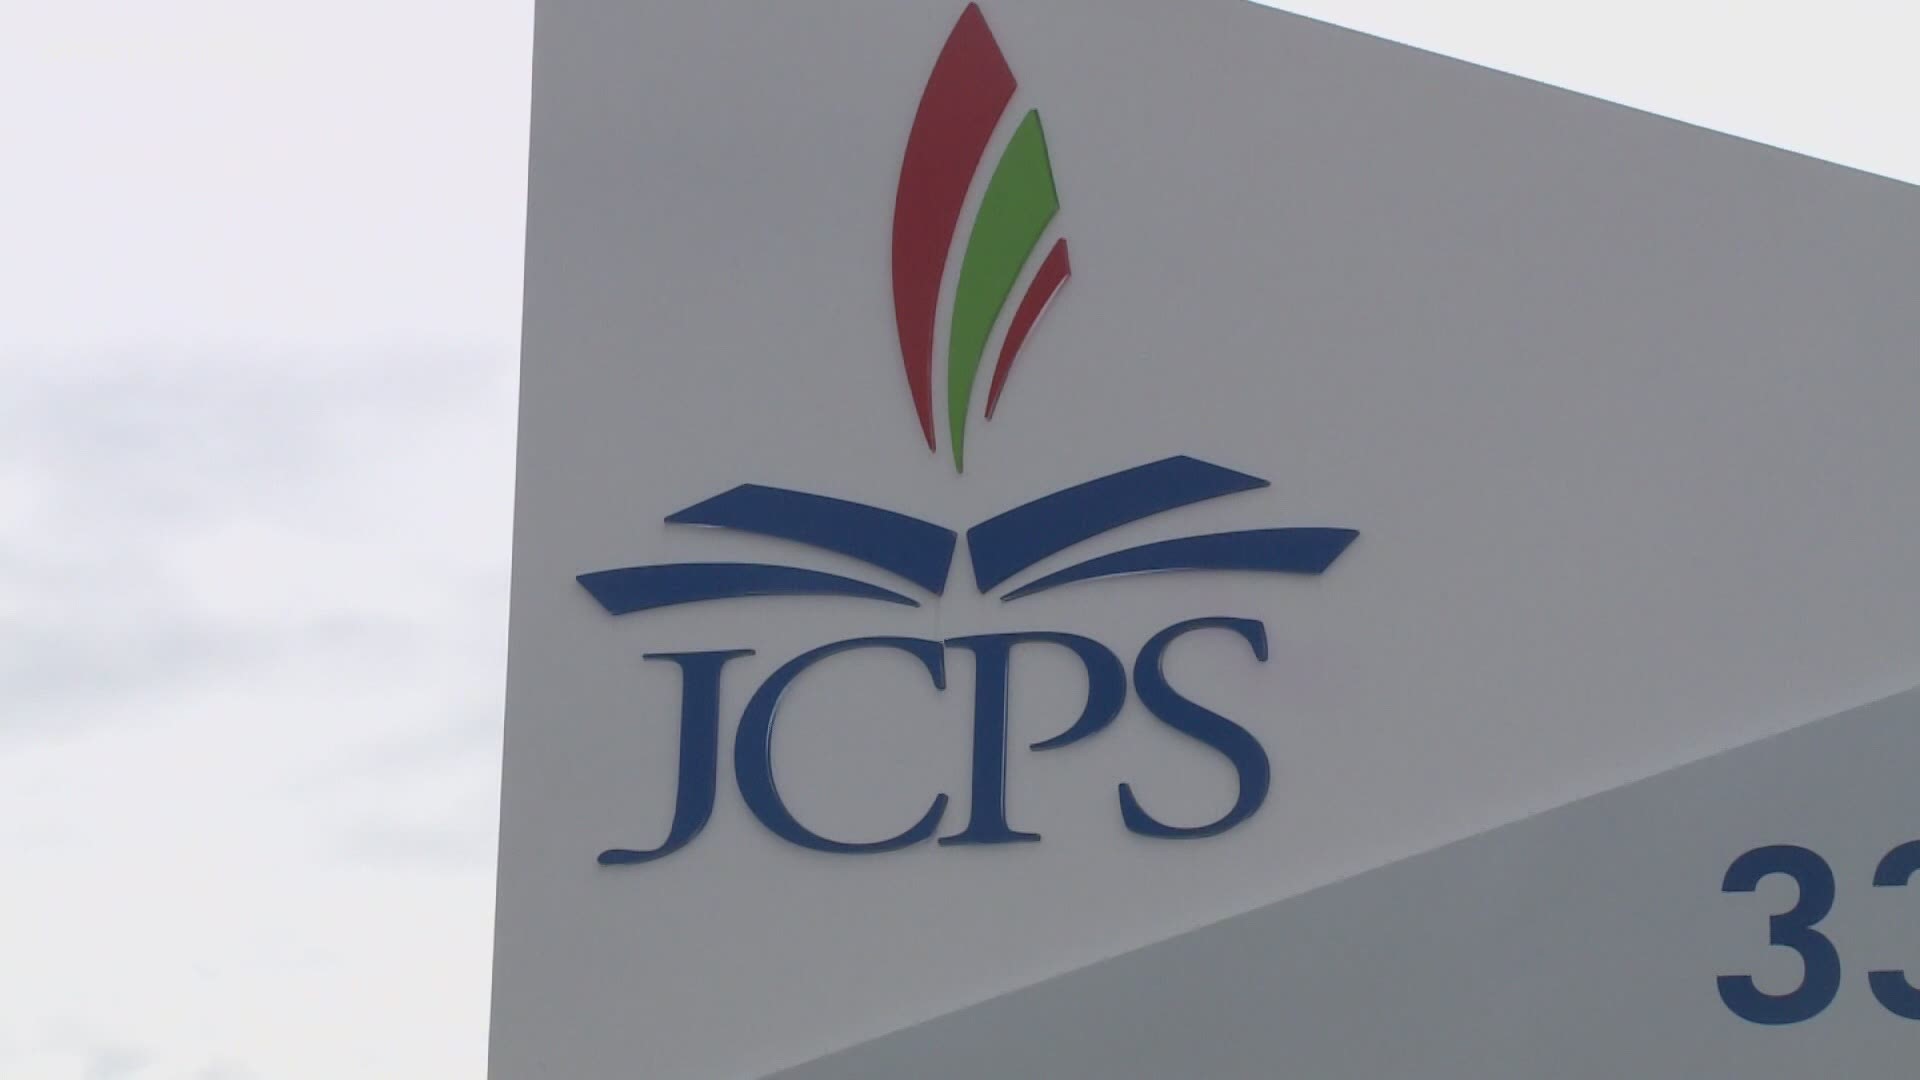 The board members appear to be split on whether Jefferson County Public Schools are ready to return to in-person classes.